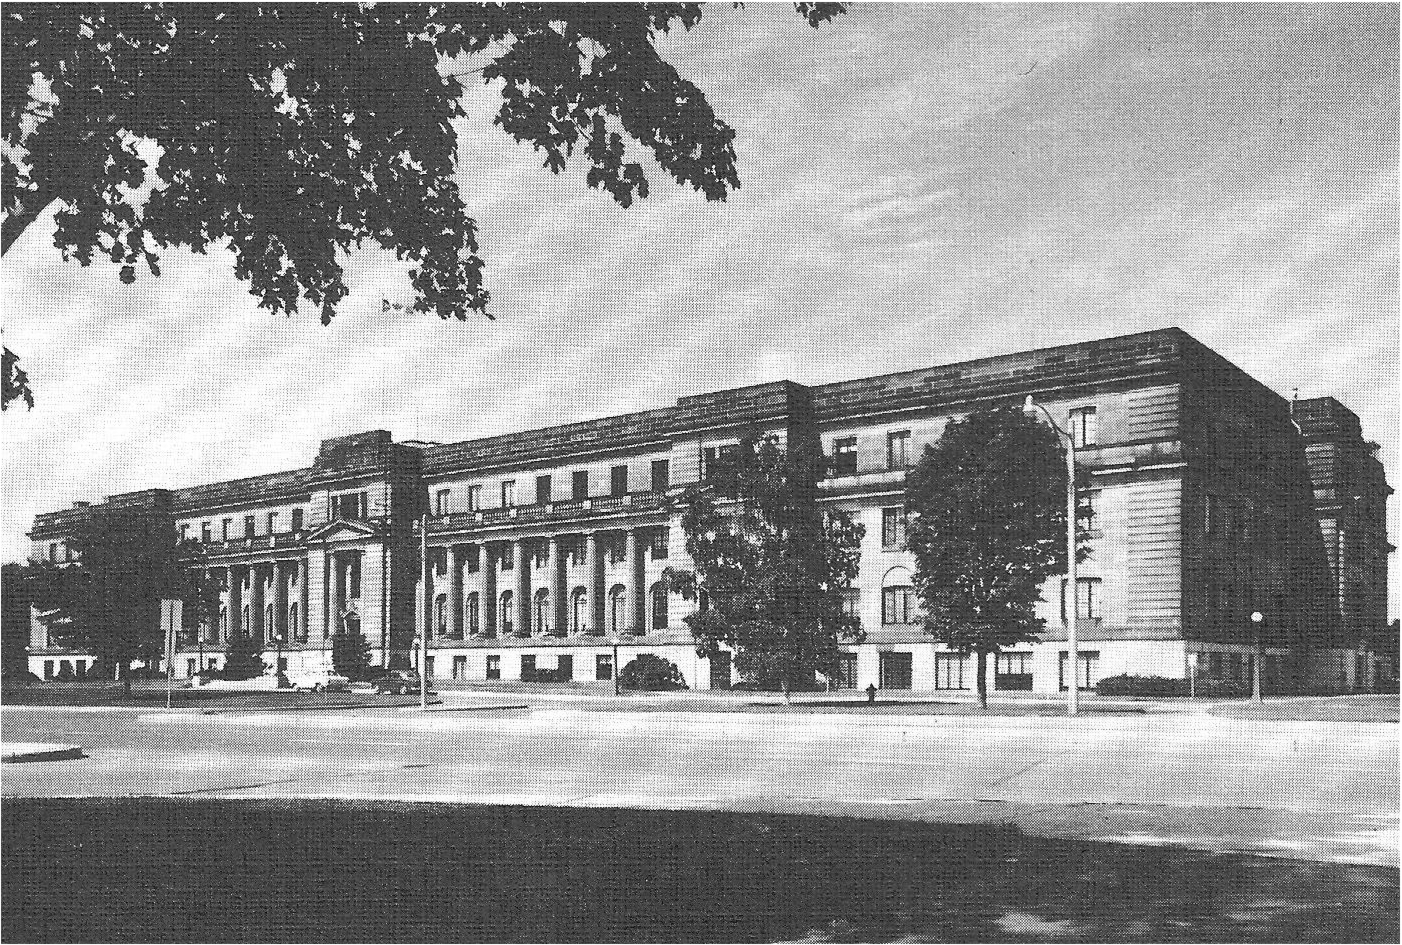 The Temple of Science in Ottawa, built in the 1930s (from an old NRC pamphlet).